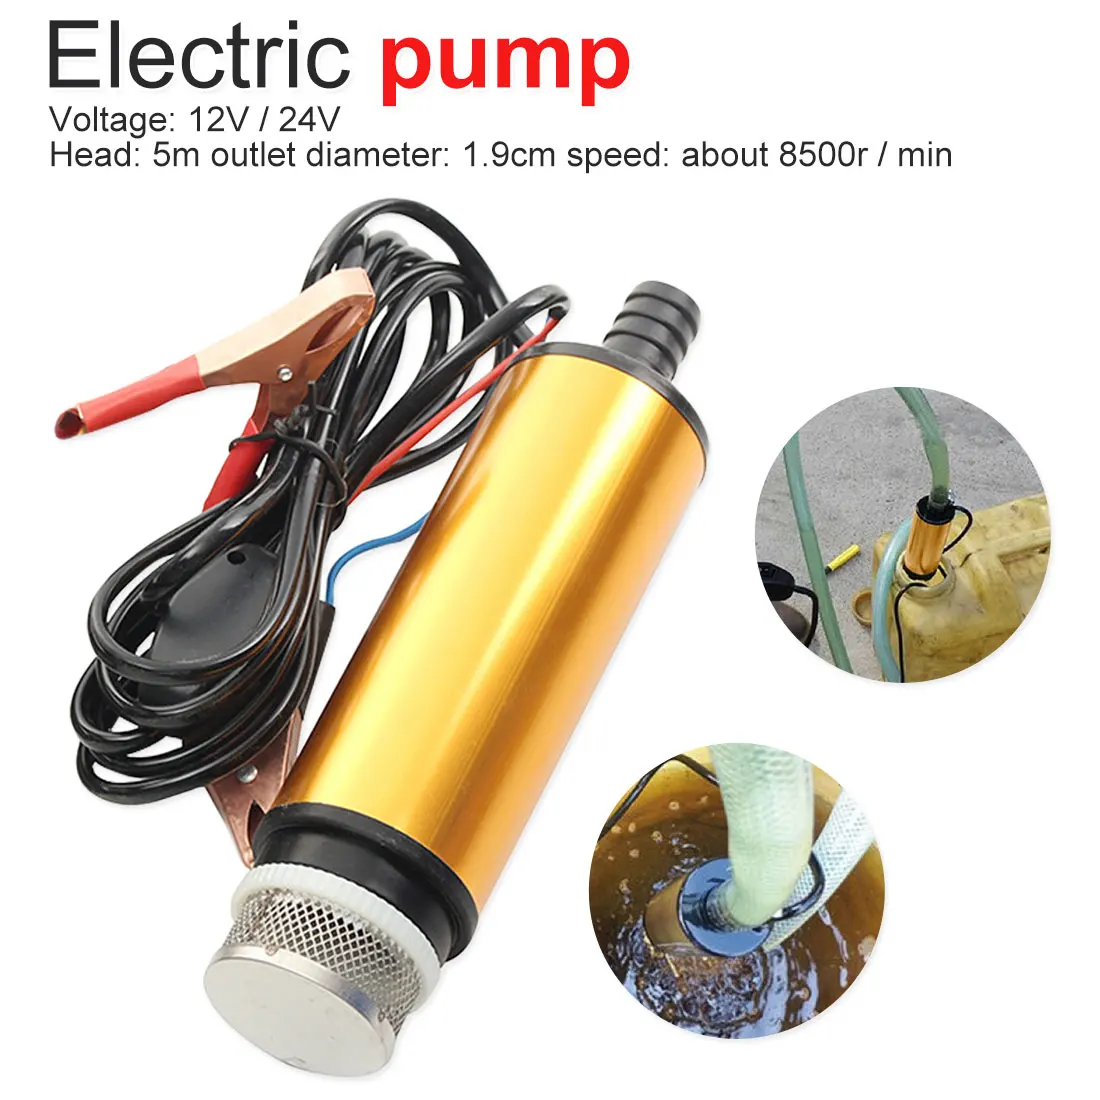 

40L/min DC 12V/24V Mini Portable Aluminum Alloy Submersible Electric Bilge Pump For Water/Diesel/Oil/Fuel Transfer With Switch